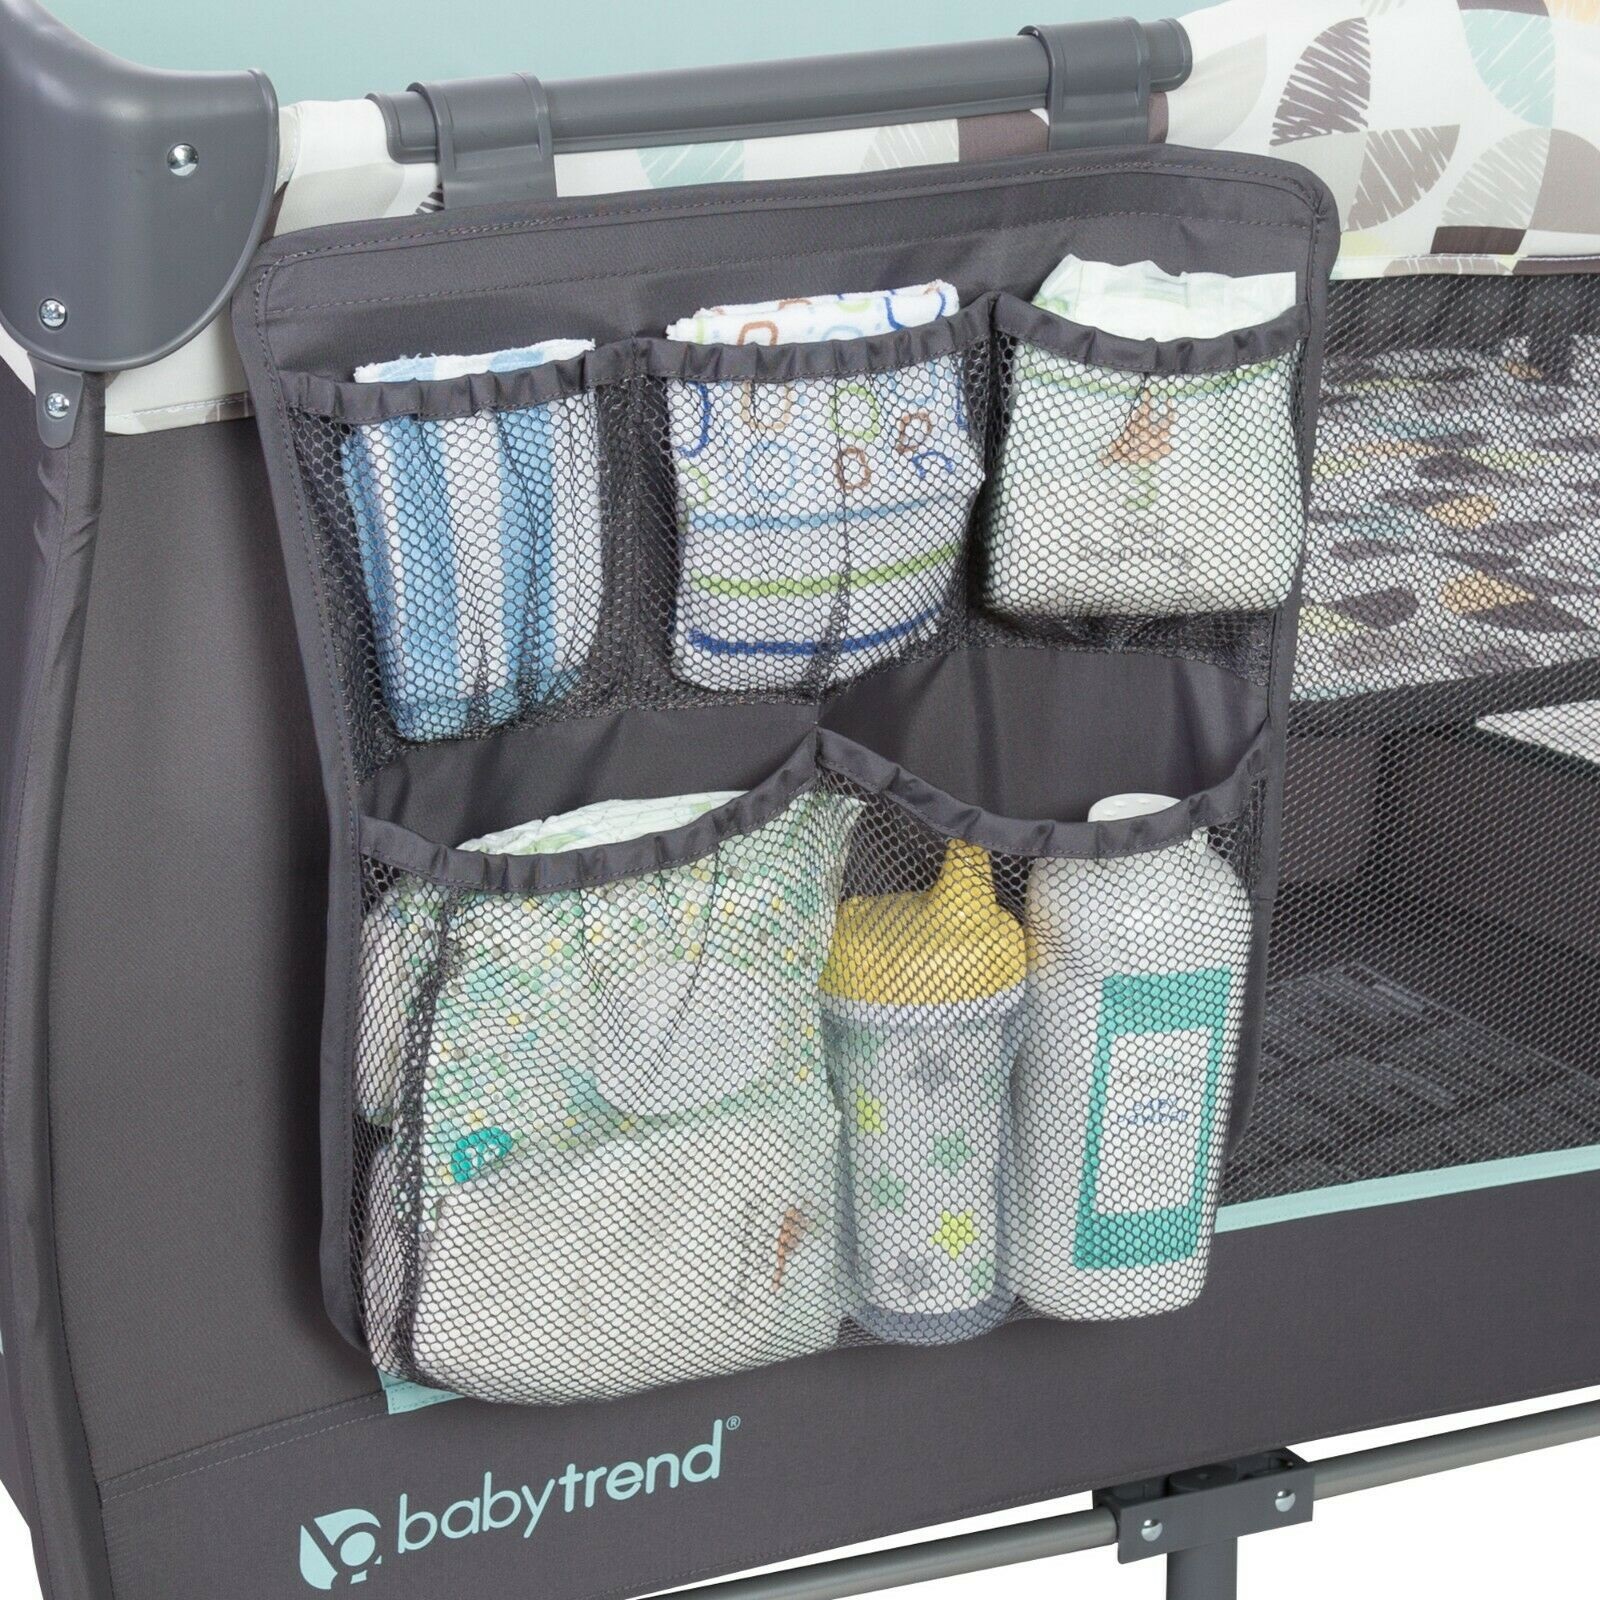 Baby Trend Trend-E Nursery Center Playpen - Doodle Dots + TOP-UP for Mattress Available